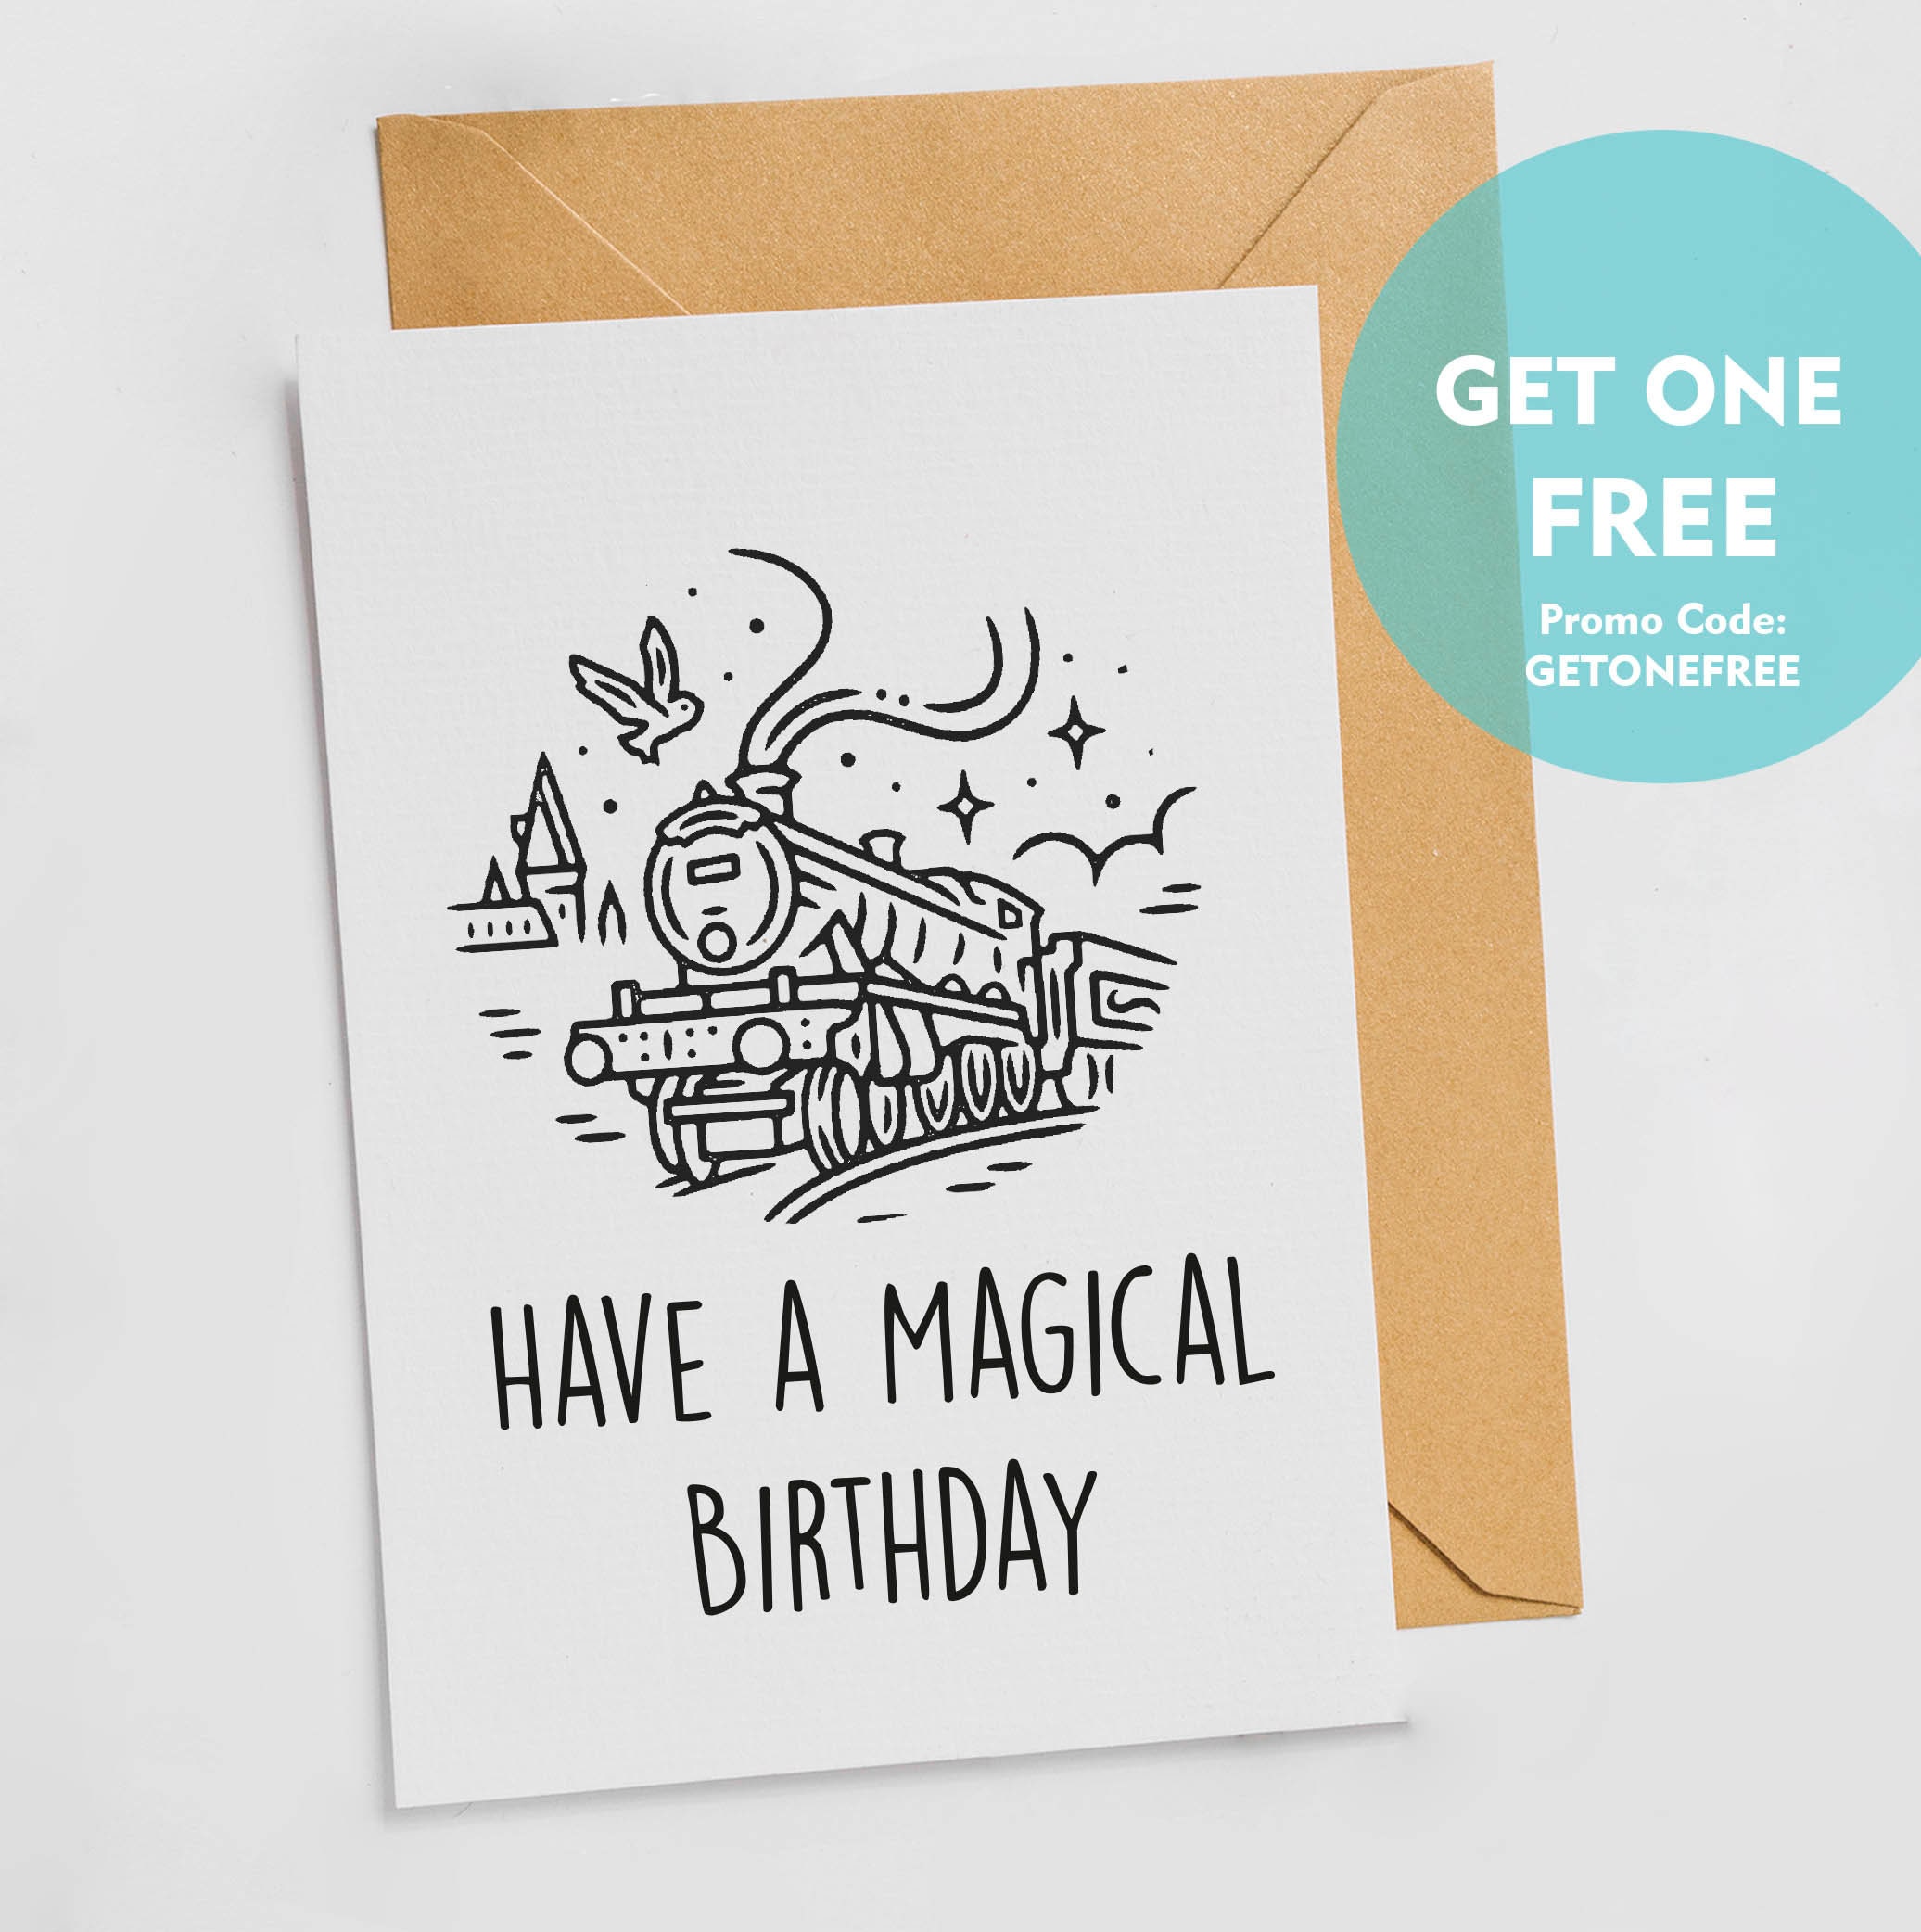 Harry Potter Inspired Birthday Card made with the Cricut